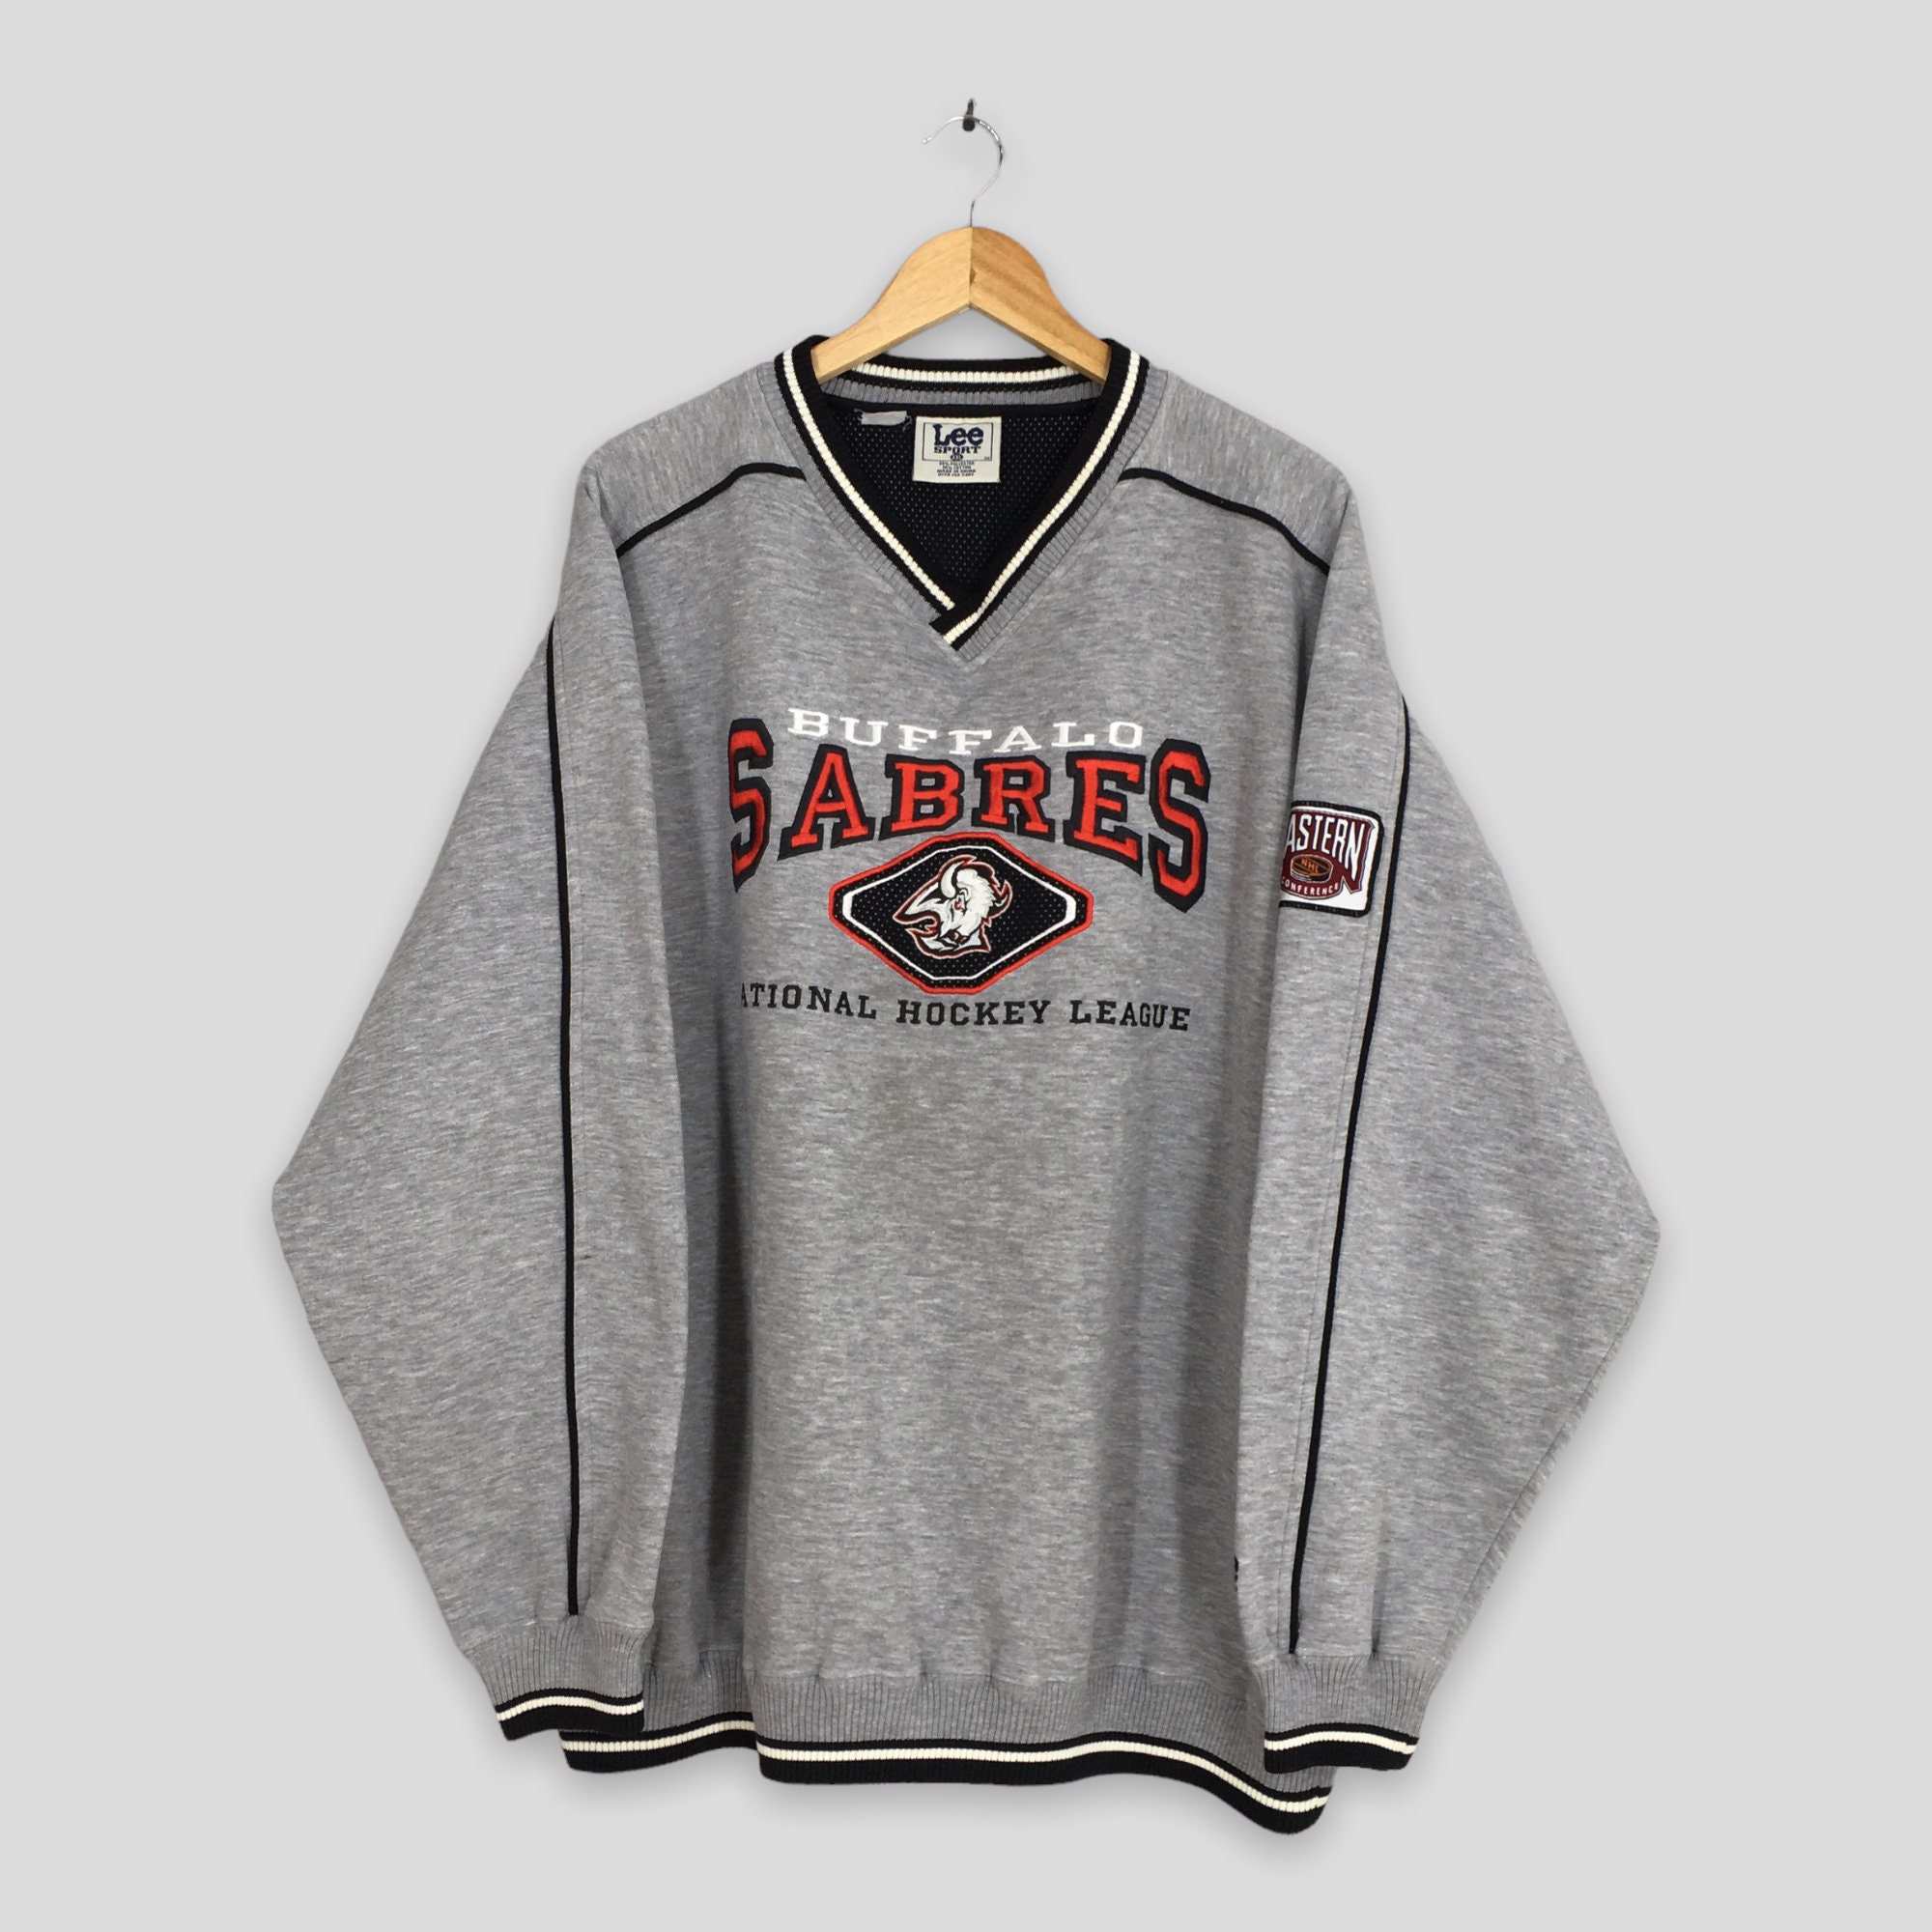 Lee Sport, Shirts, Vintage Buffalo Sabres Sweatshirt Mens Size Large  Embroidered 9s Classic Nhl